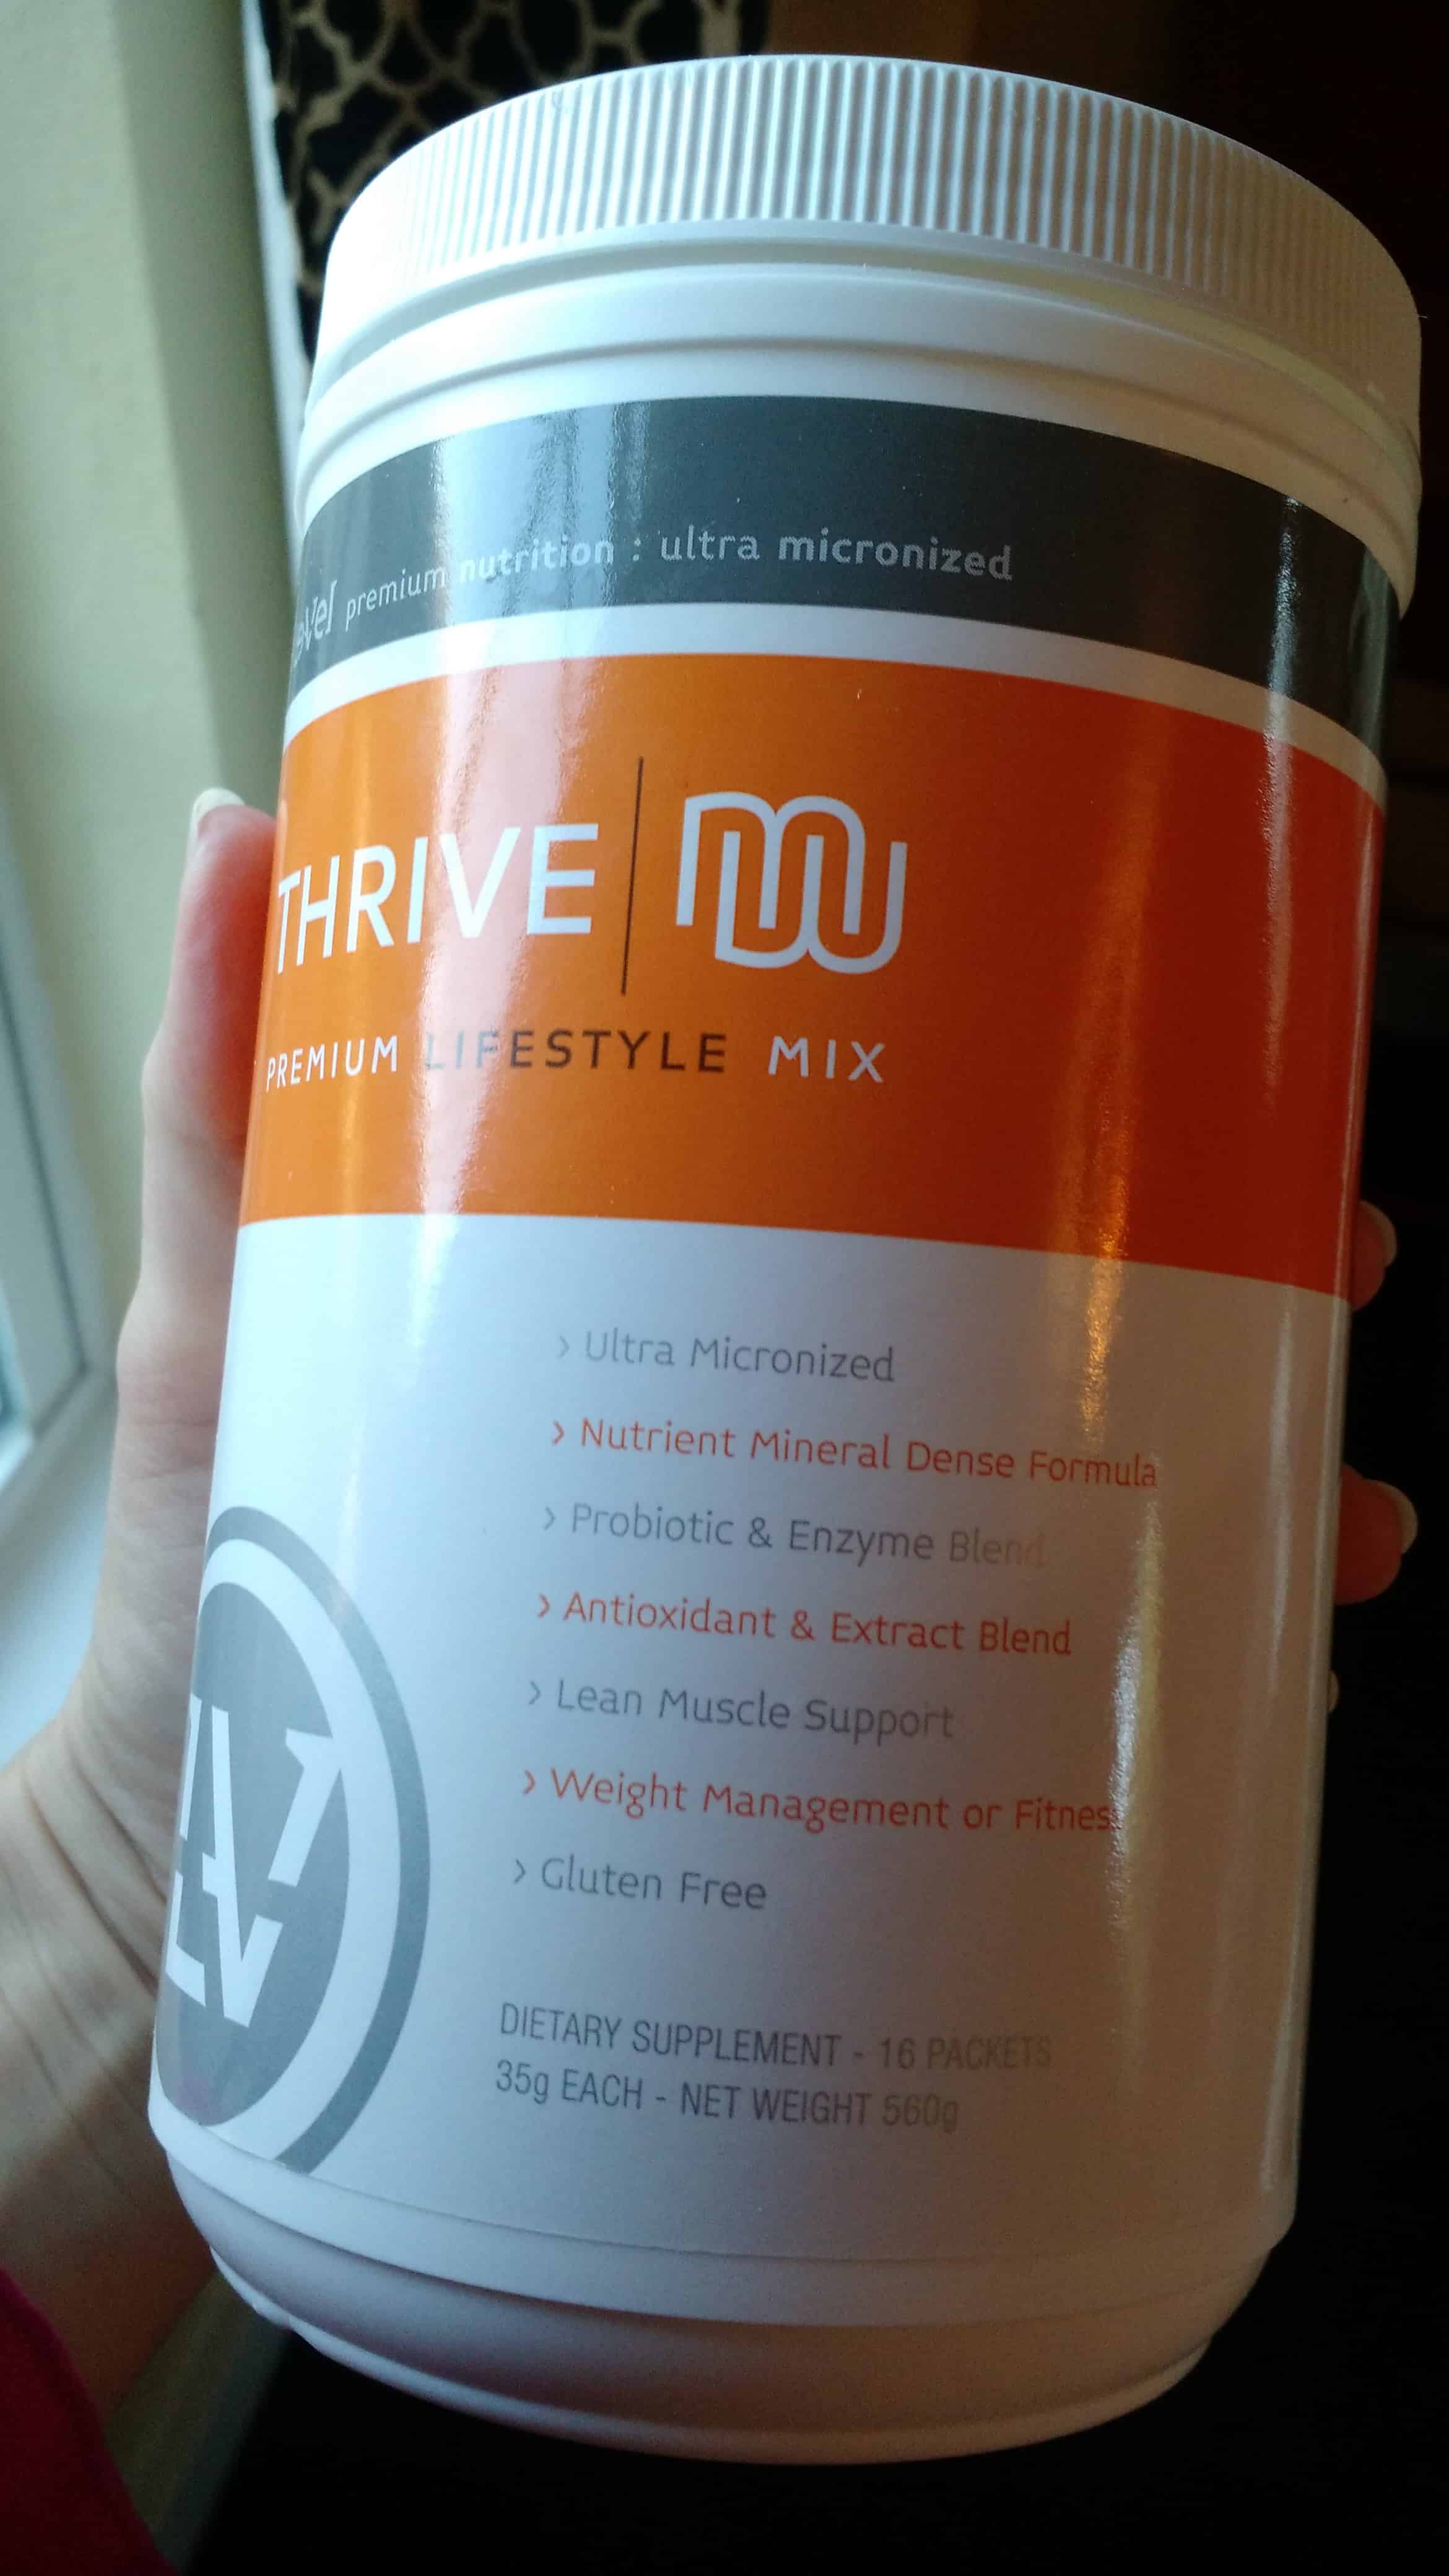 The power behind the smoothie! Premium Lifestyle Mix from Le-vel... packed with protein, vitamins, minerals, amino acids, probiotics and enzymes!